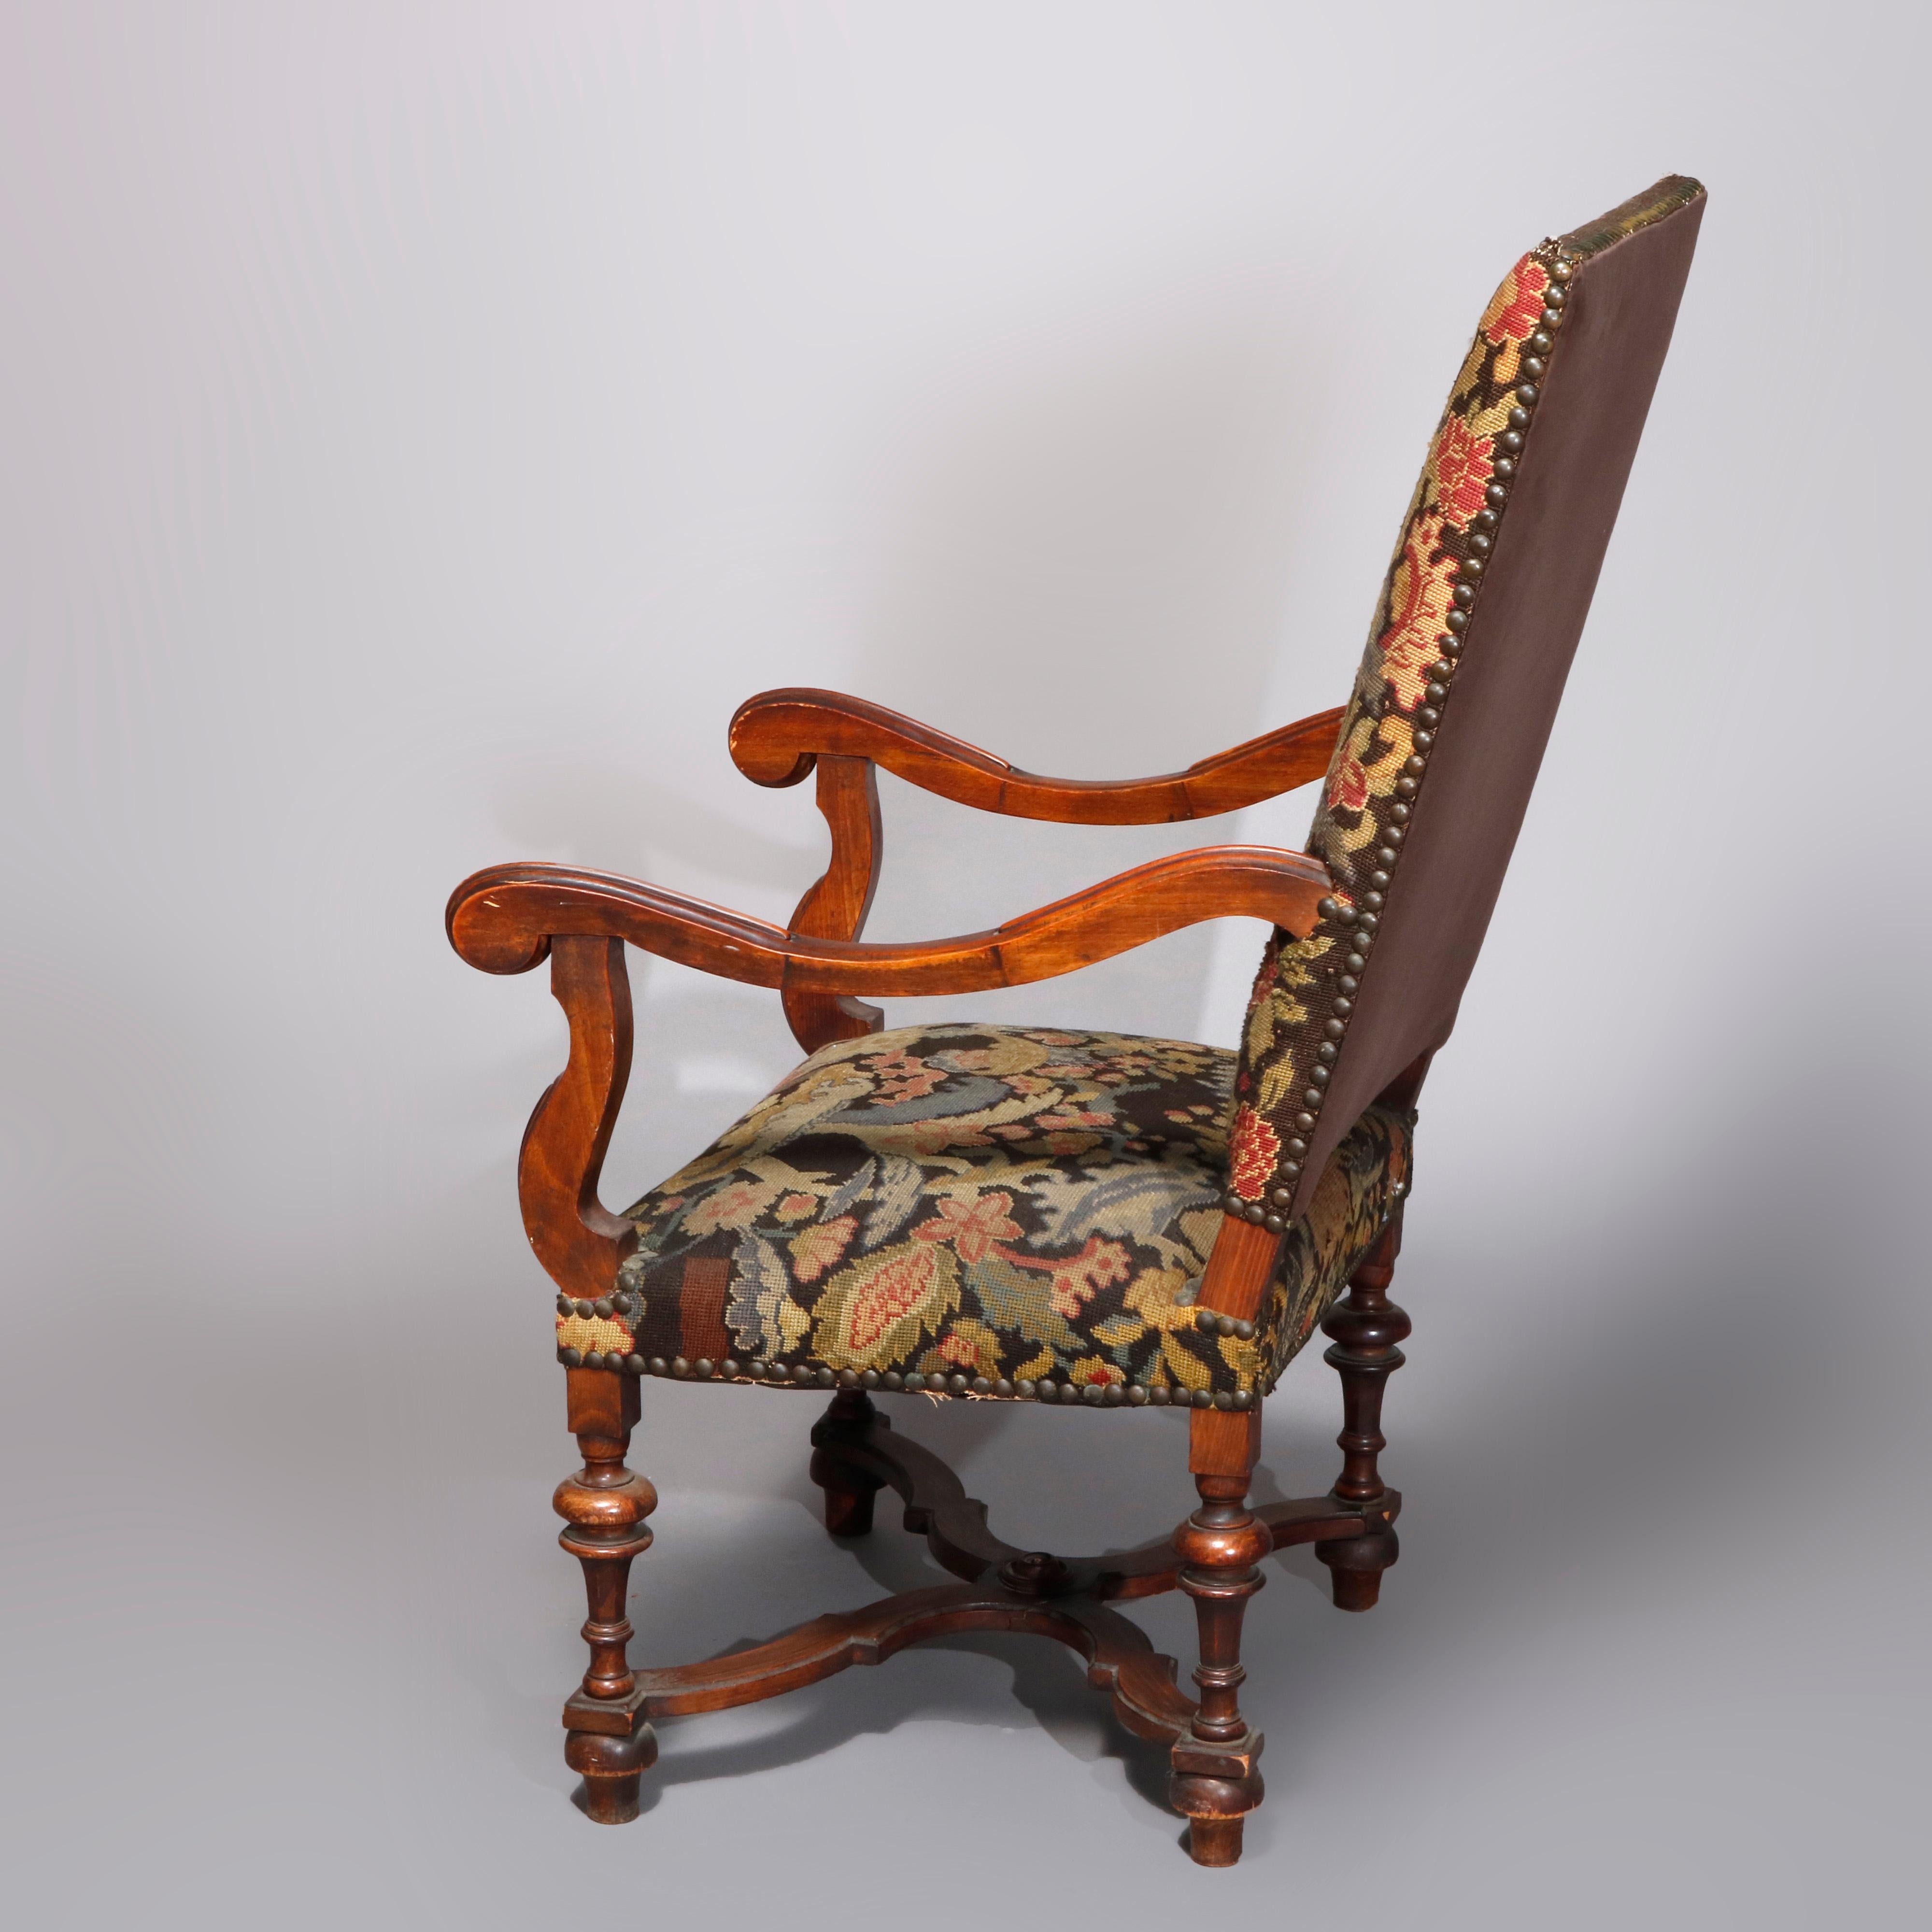 Carved Antique English Elizabethan Style Walnut and Tapestry Tall Throne Chair